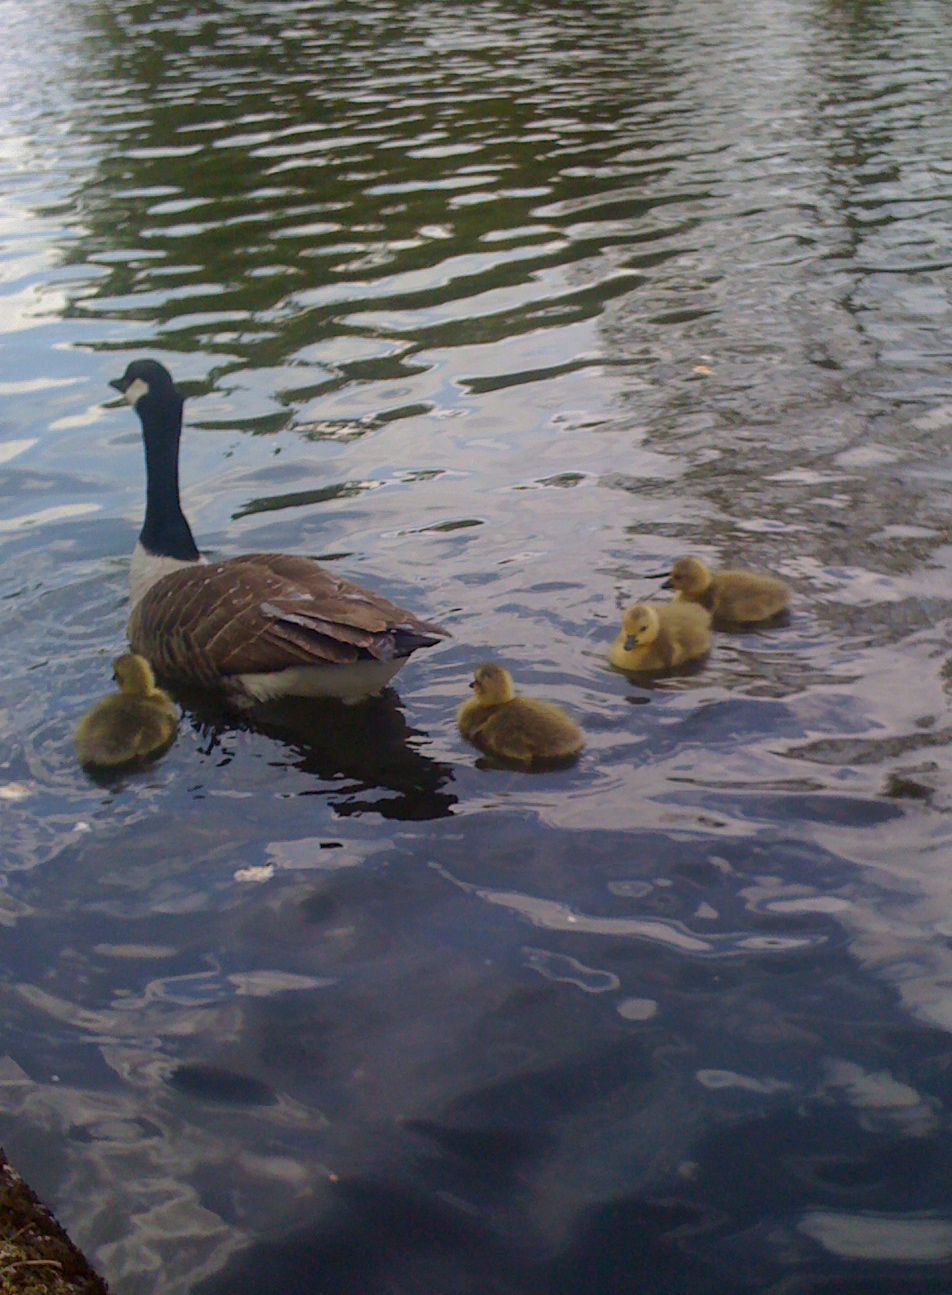 a few ducklings and two ducks in a body of water